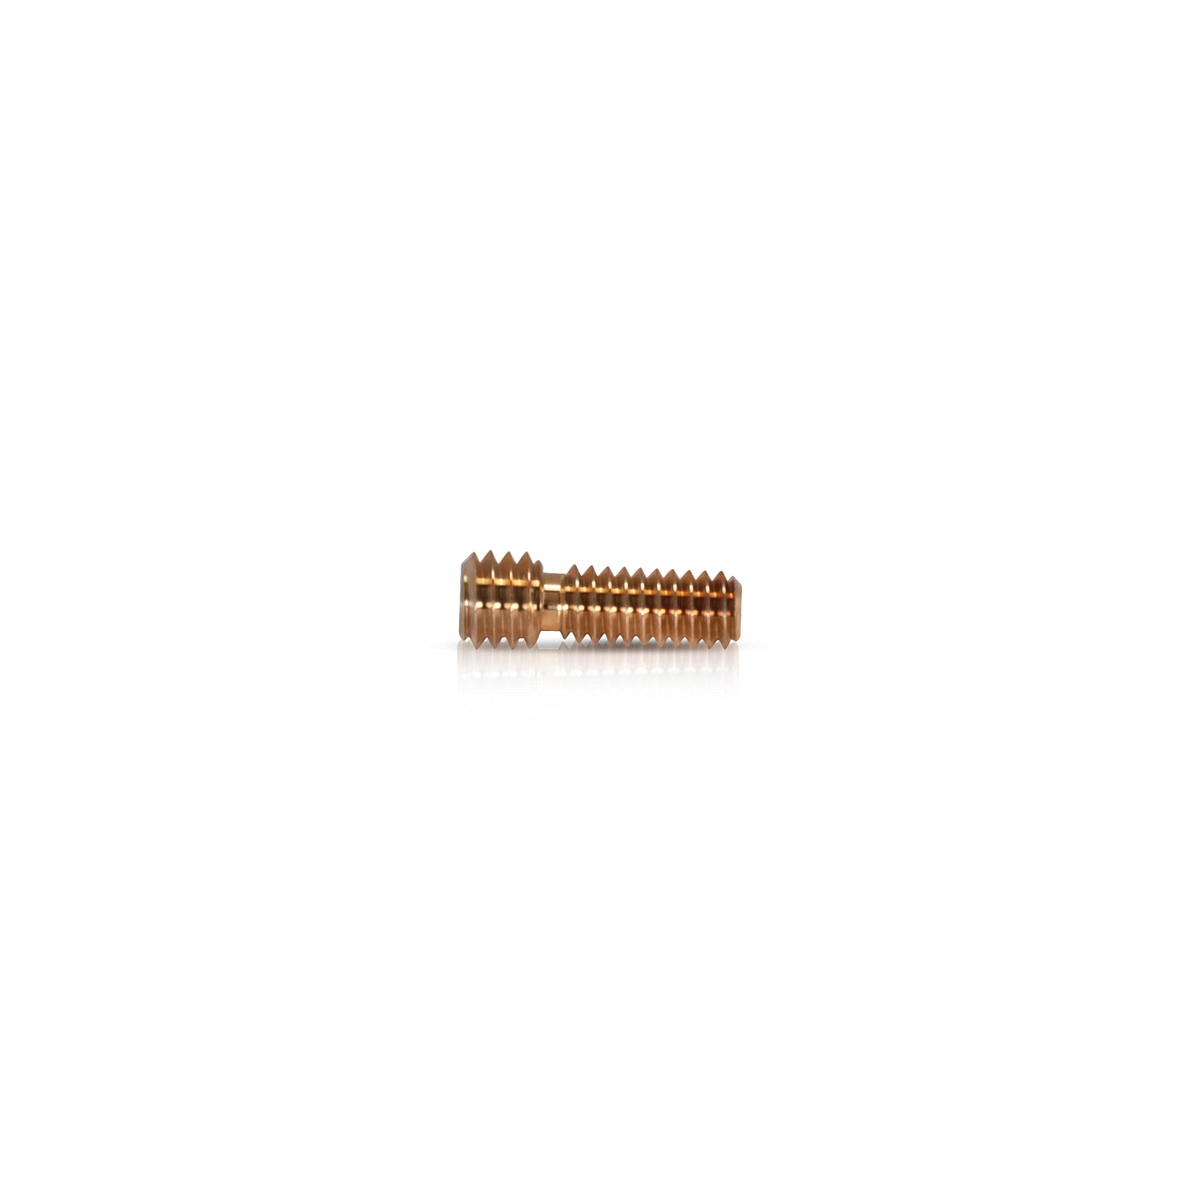 5/16-18 to 1/4-20 Conversion Set Screw, Total Length: 7/8''